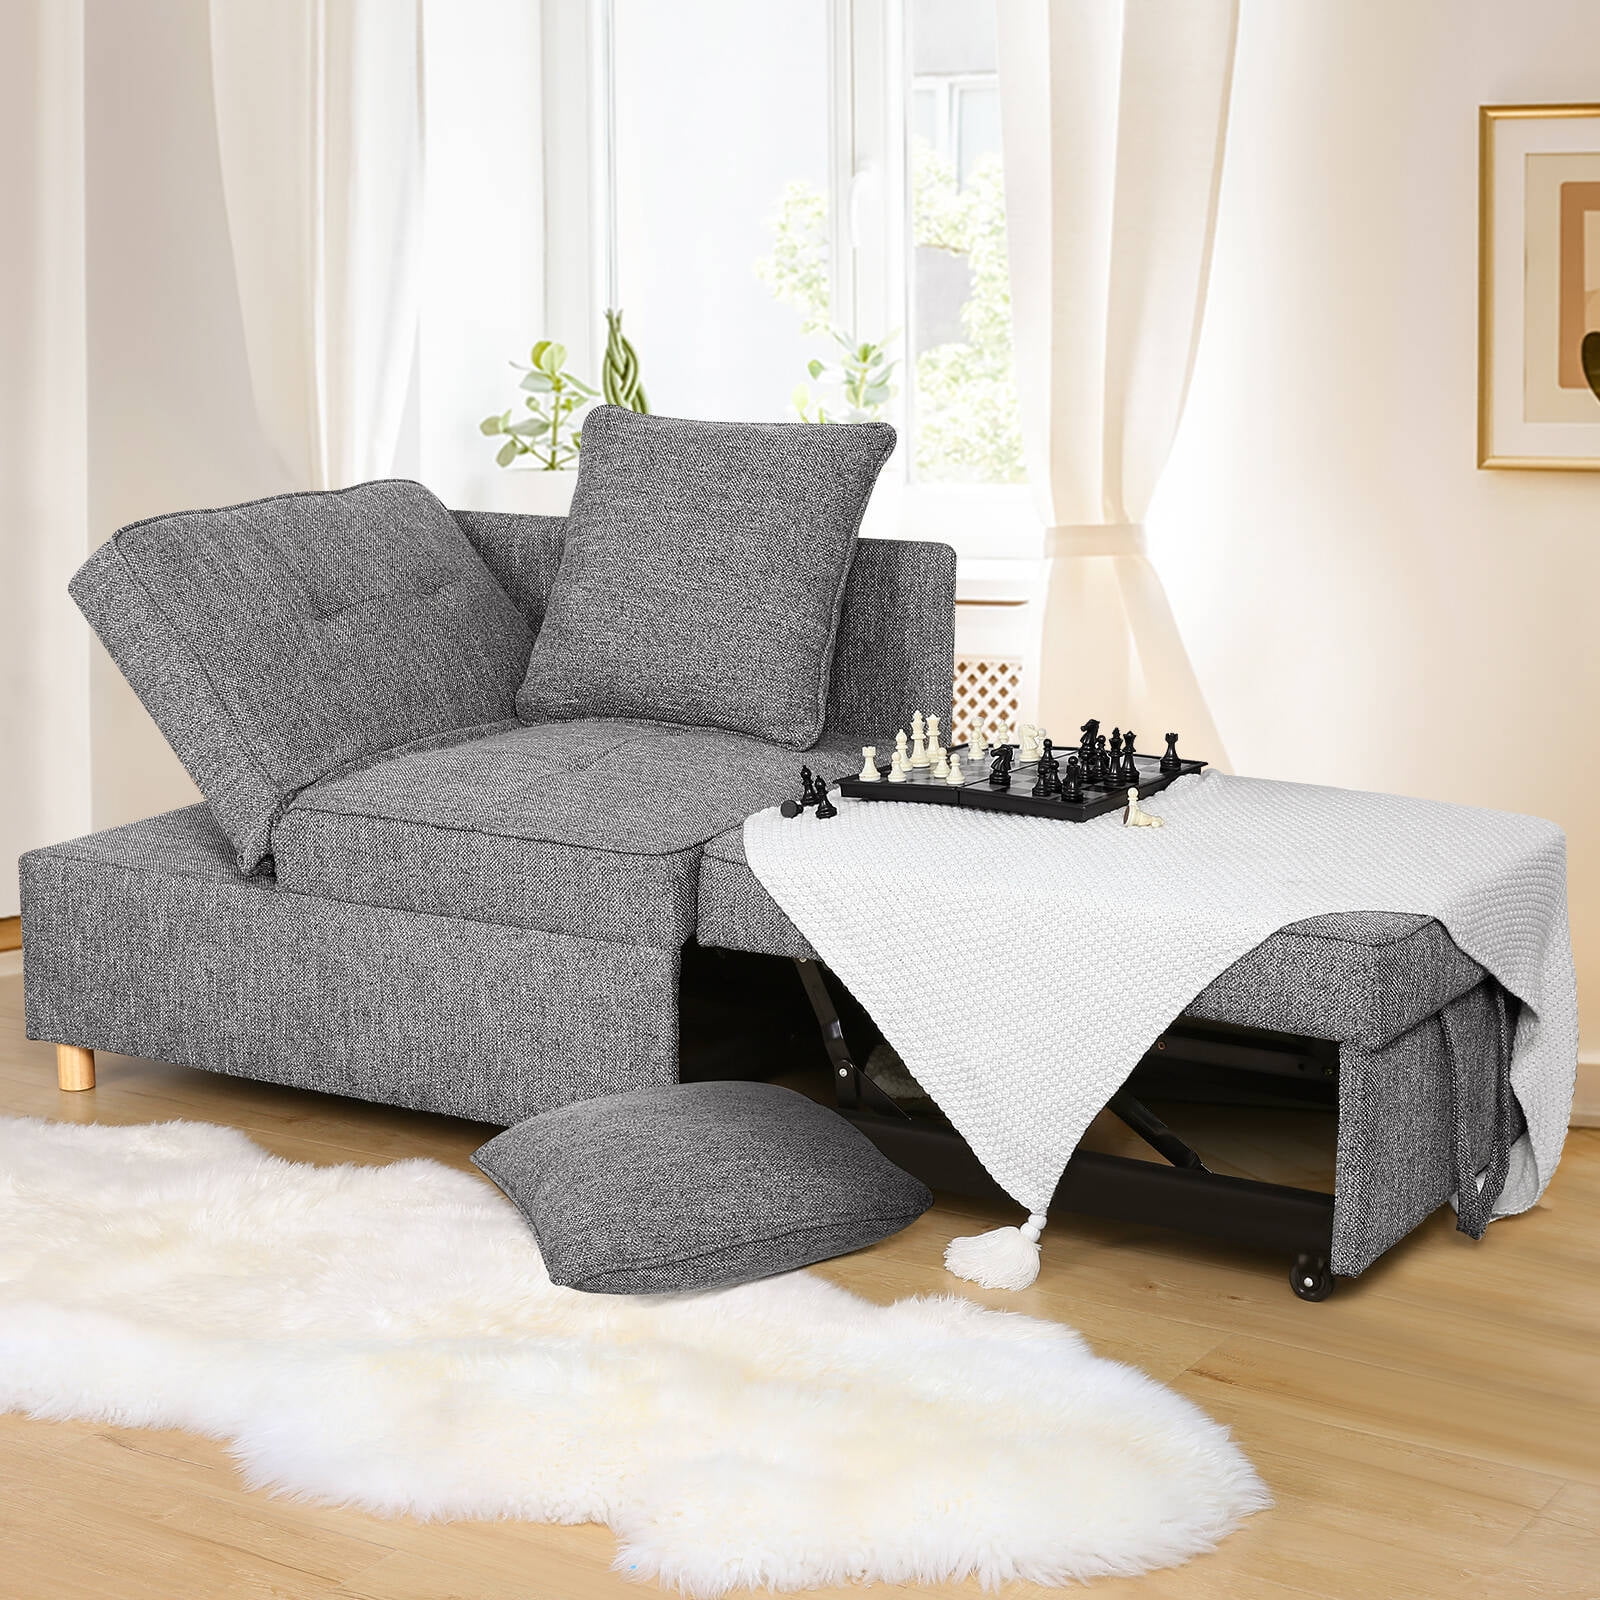  SEJOV Sofa Bed Chair 4-in-1 Convertible Chair Bed, 3-Seat Linen  Fabric loveseat Sofa with 2 Throw Pillow, Single Recliner for Small Space  with 5 Adjustable Backrest : Home & Kitchen